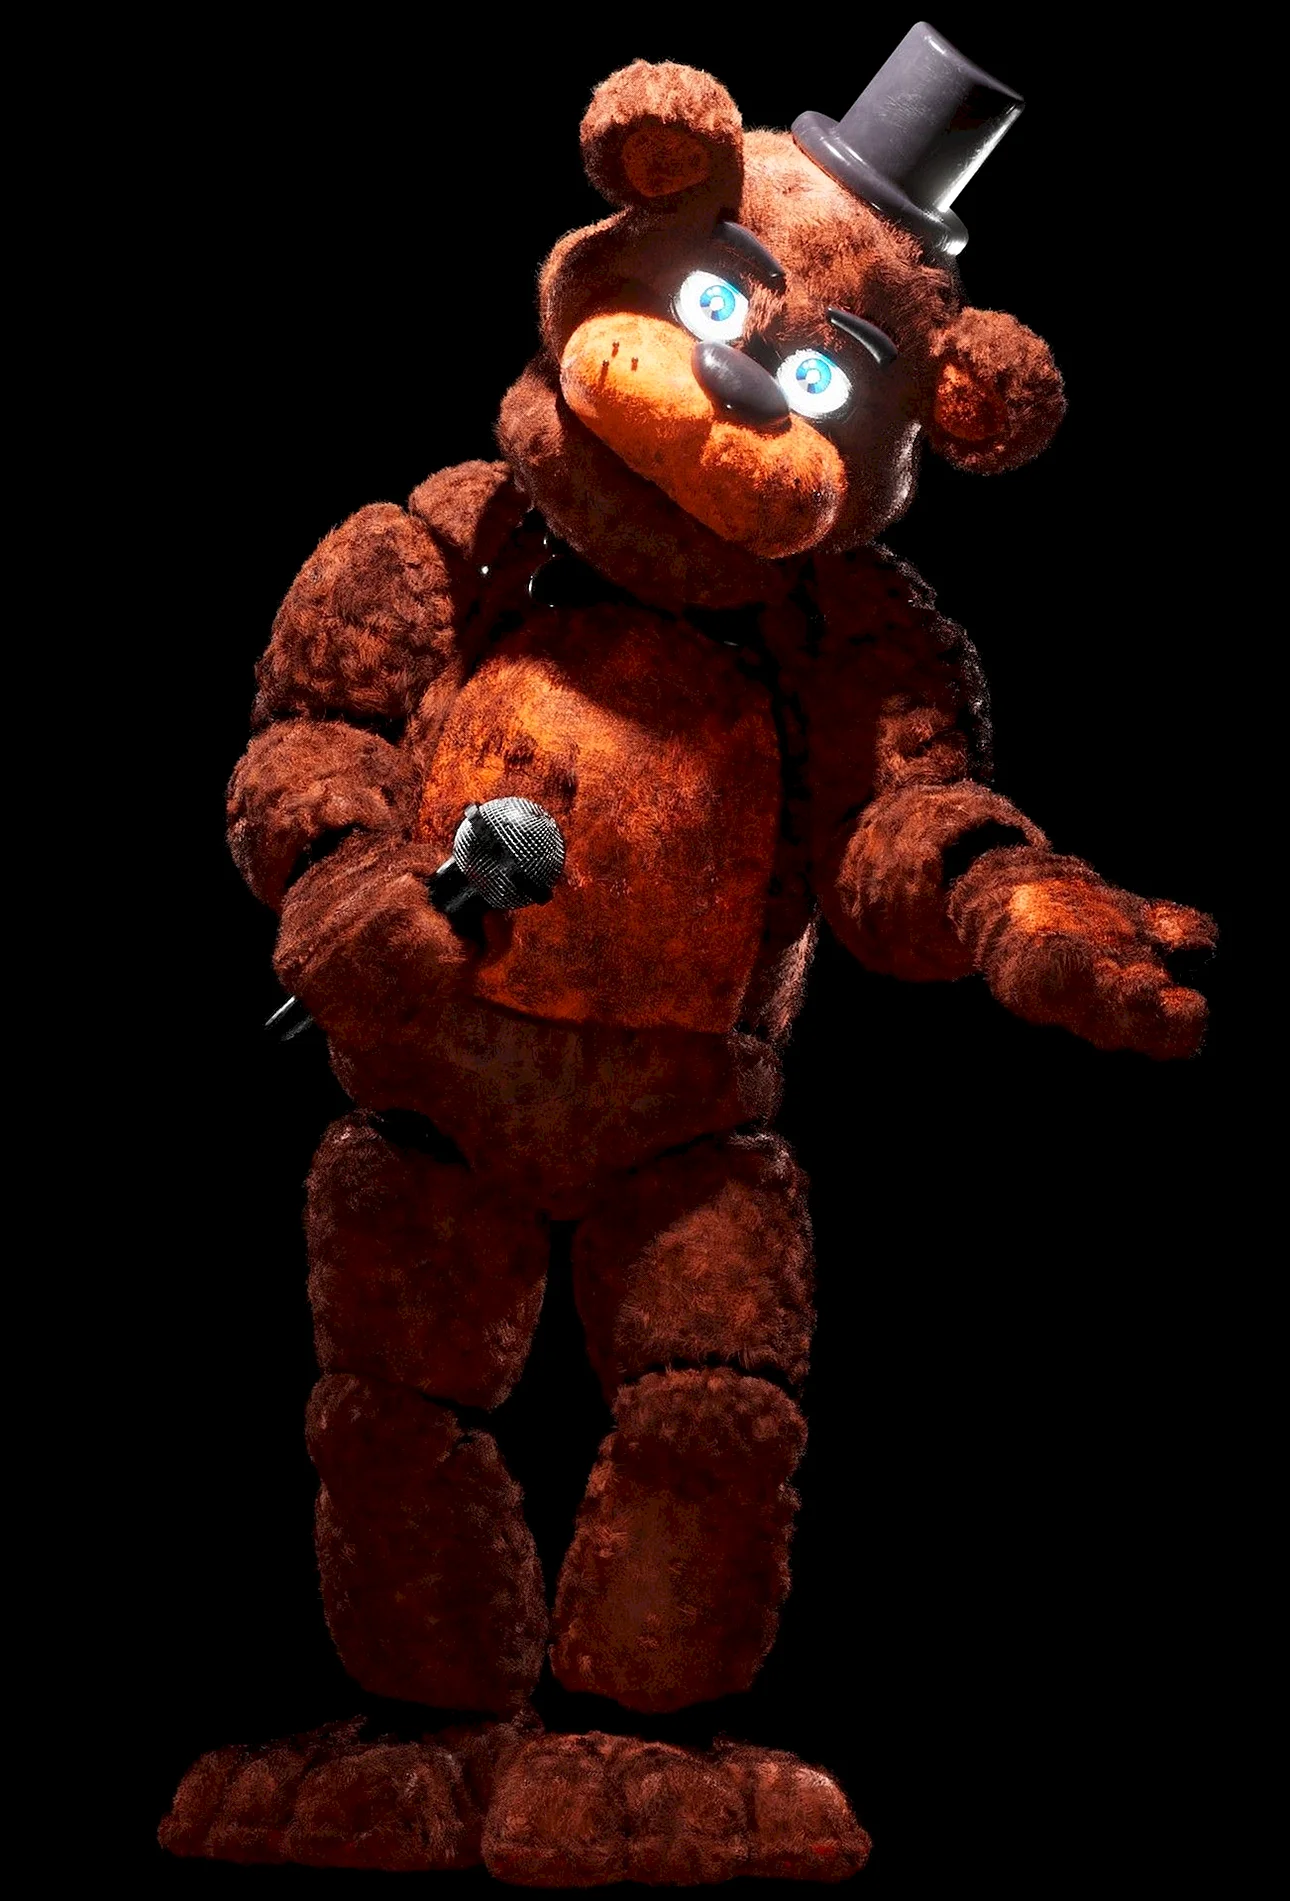 Animatronic Fnaf 2022 Wallpaper For iPhone